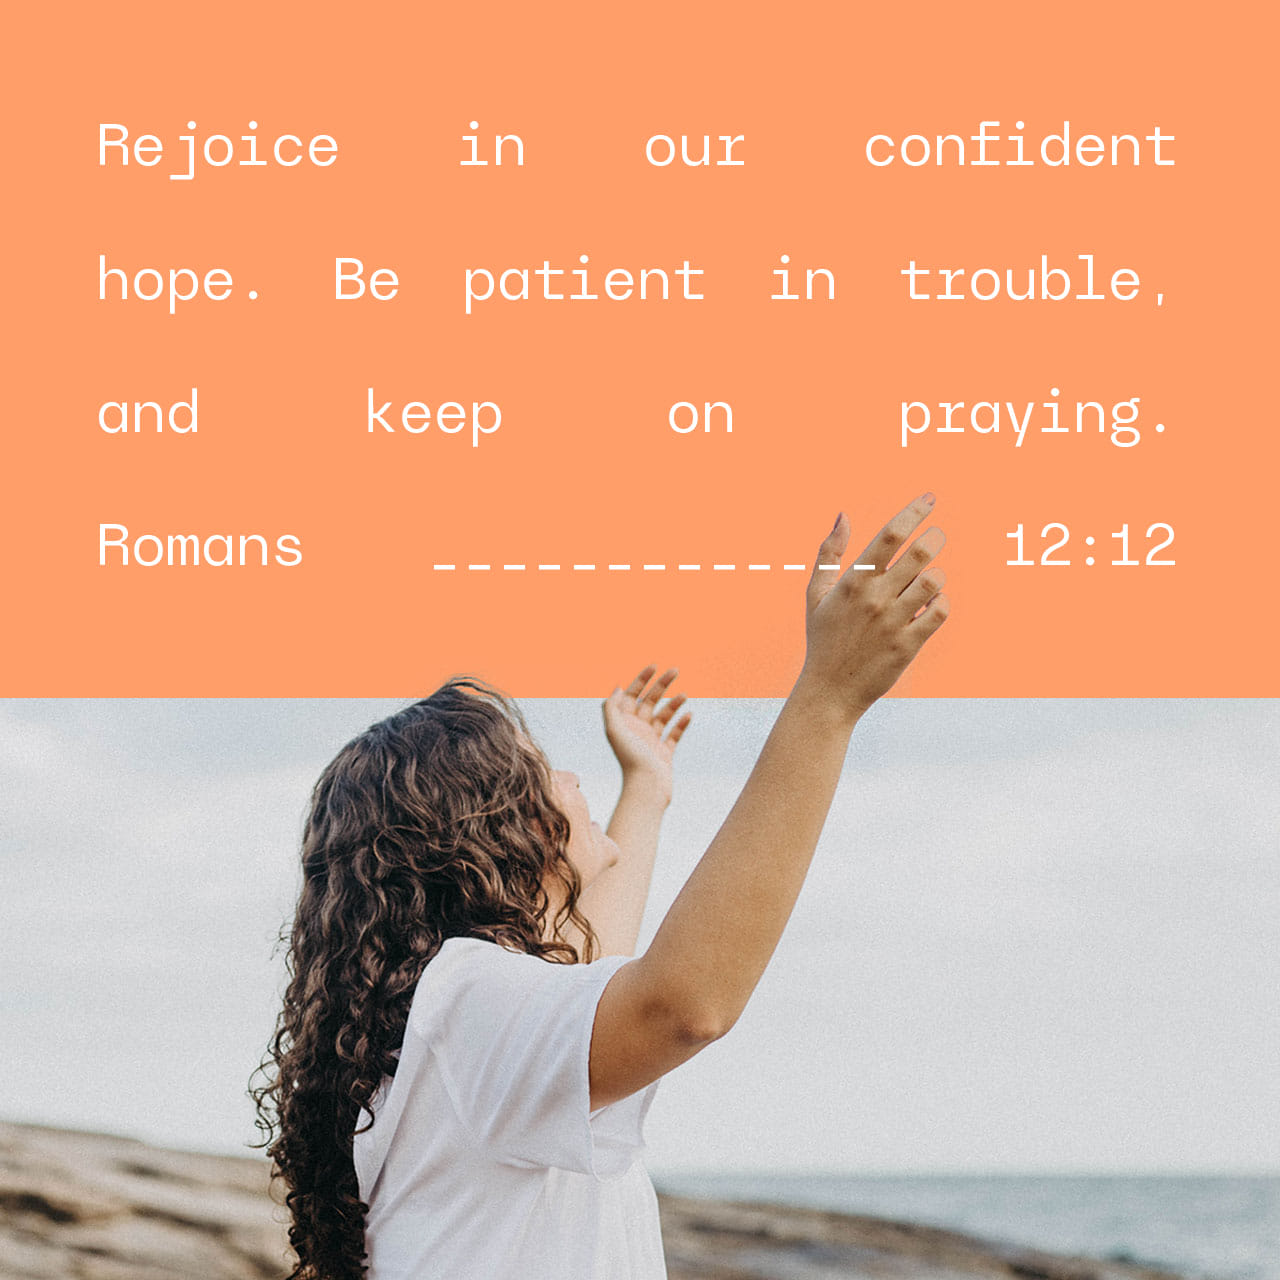 Rejoice in our confident hope. Be patient in trouble, and keep on praying. - Romans 12:12 - Verse Image